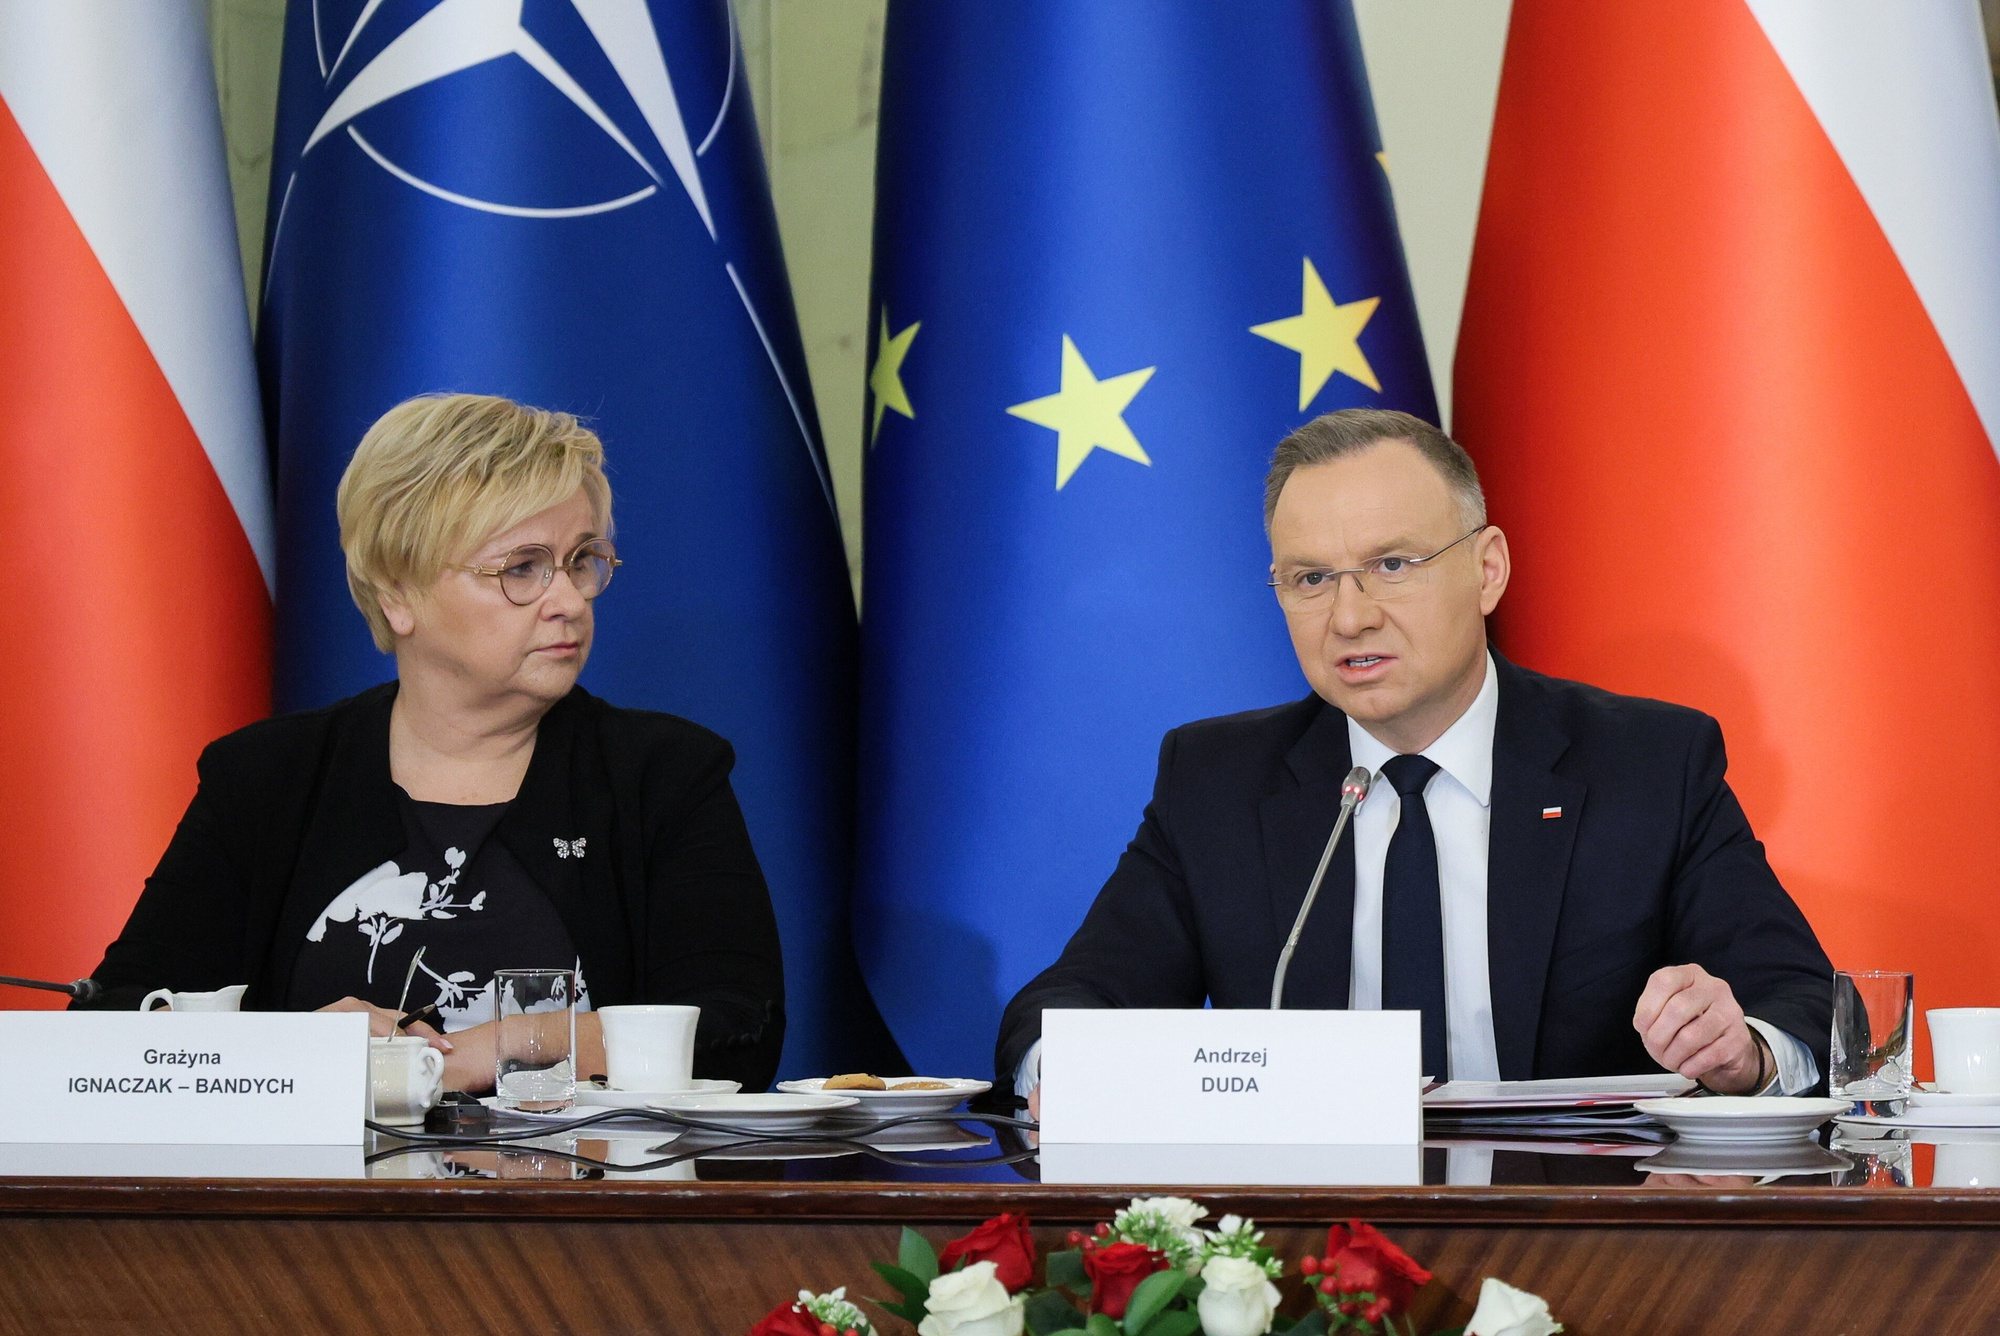 epa11214275 Polish President Andrzej Duda (R) and head of the Polish President Chancellery Grazyna Ignaczak-Bandych (L) attend a meeting of the National Security Council (BBN) at the Presidential Palace in Warsaw, Poland, 11 March 2024. The meeting was held before the departure of Polish President Andrzej Duda and Prime Minister Donald Tusk on their visit to Washington on 12 March, where they will meet the US president on the 25th anniversary of Poland&#039;s accession to NATO.  EPA/PAWEL SUPERNAK POLAND OUT